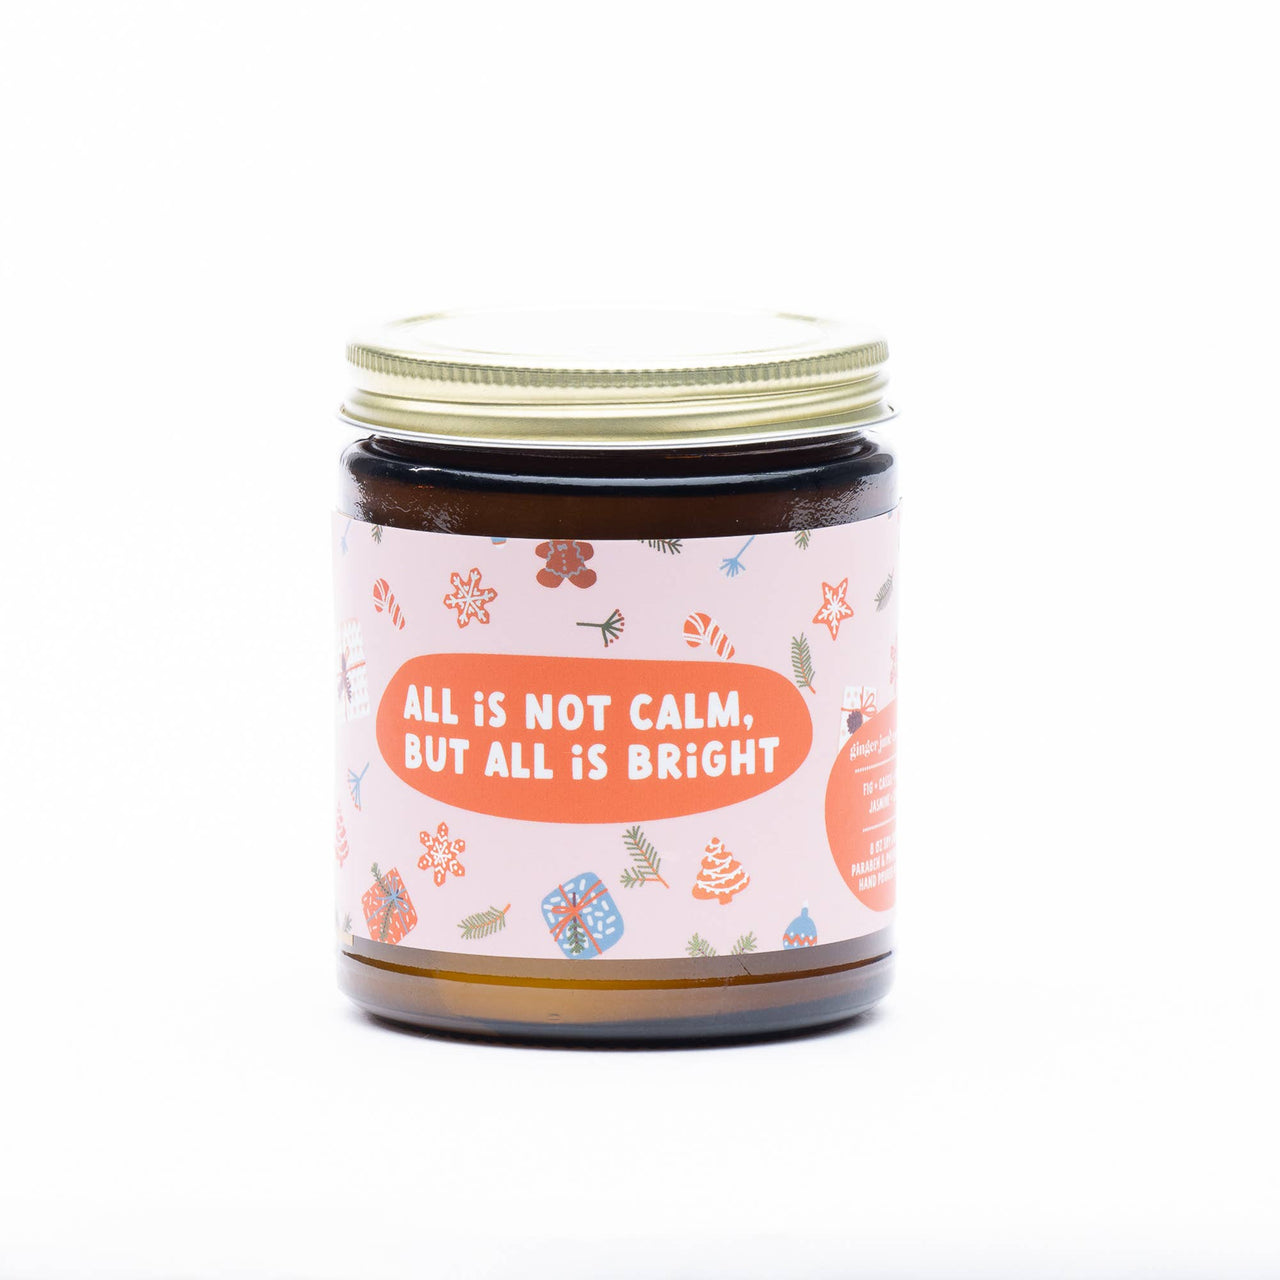 All is Not Calm but All is Bright- Holiday Soy Candle